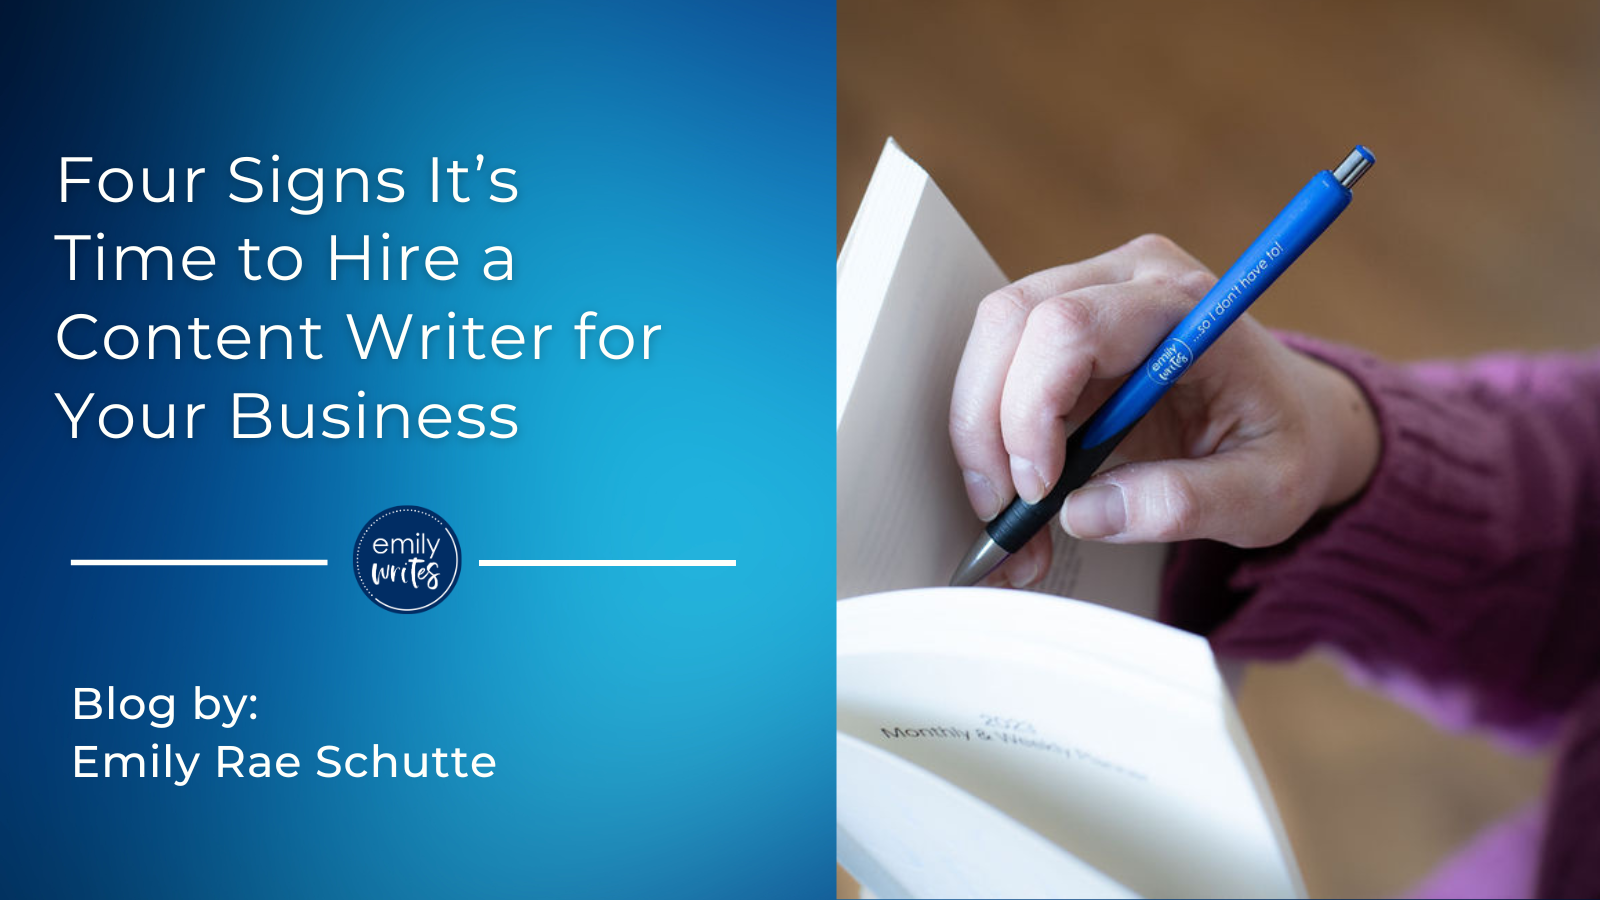 Four Signs It’s Time to Hire a Content Writer for Your Business